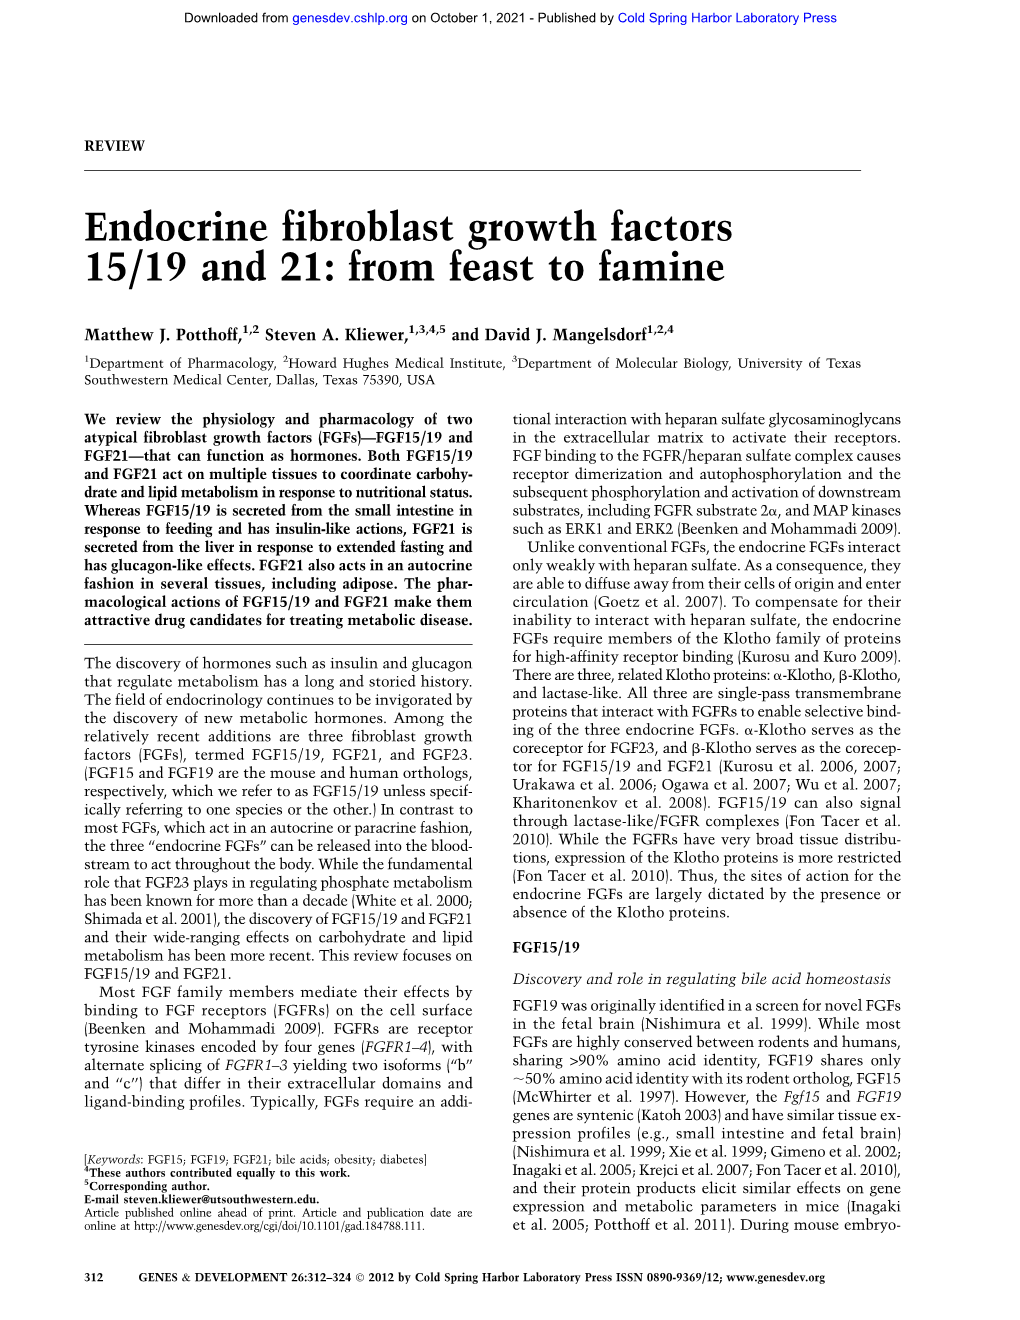 Endocrine Fibroblast Growth Factors 15/19 and 21: from Feast to Famine